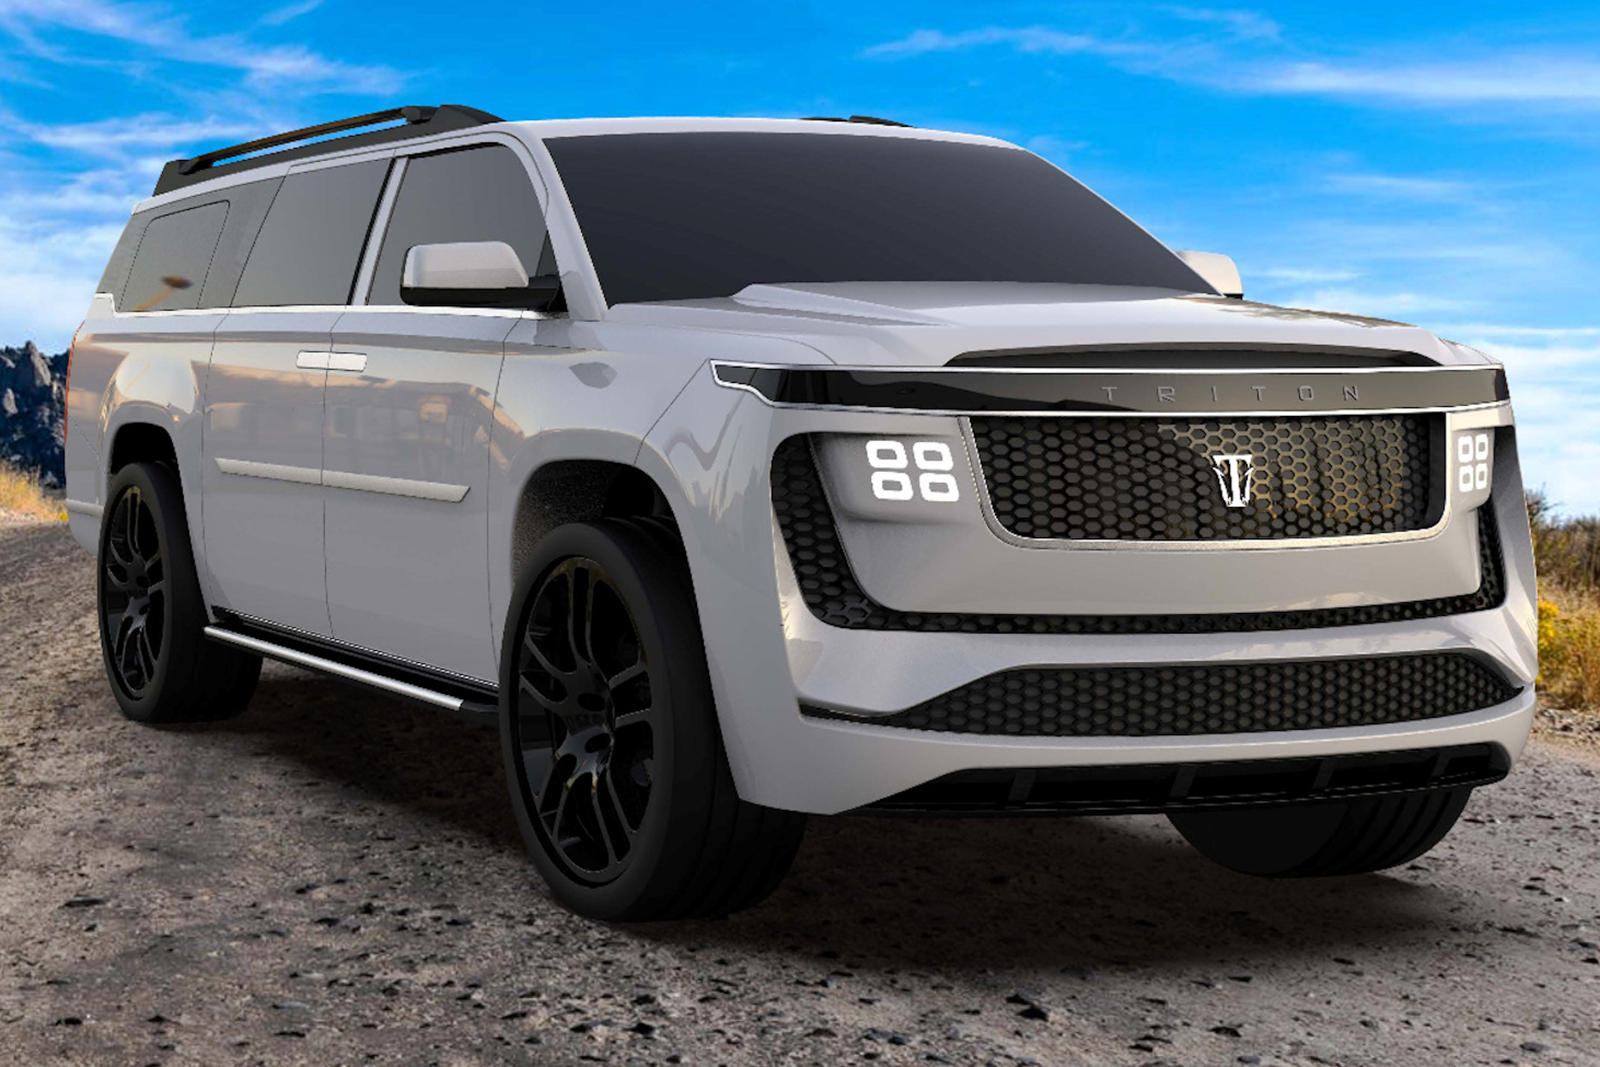 1,500HP Electric EightSeater SUV Has 700 Mile Range CarBuzz